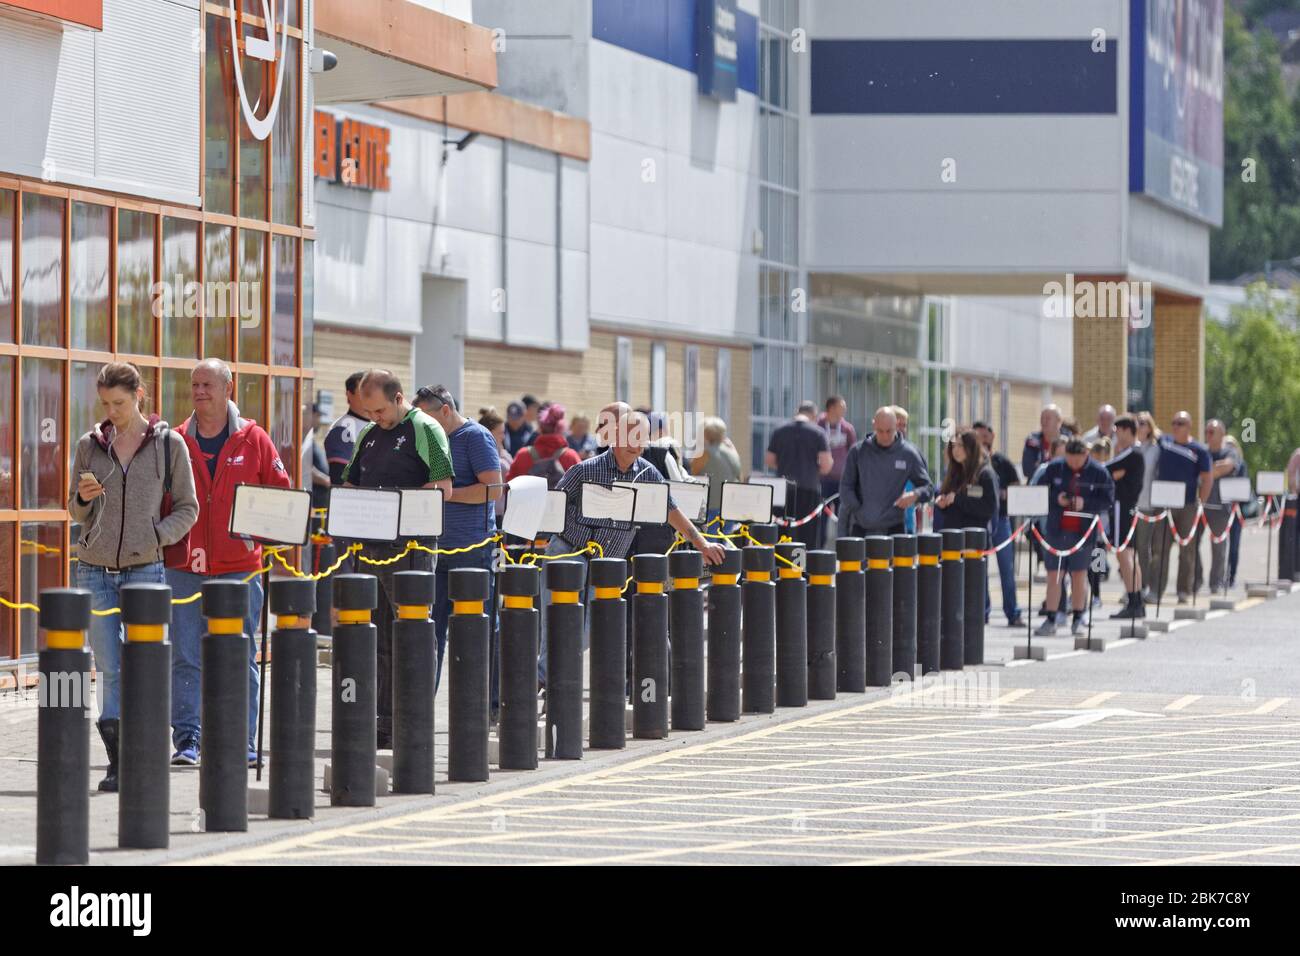 A long queue of shoppers outside the B&Q store in Swansea Stock Photo